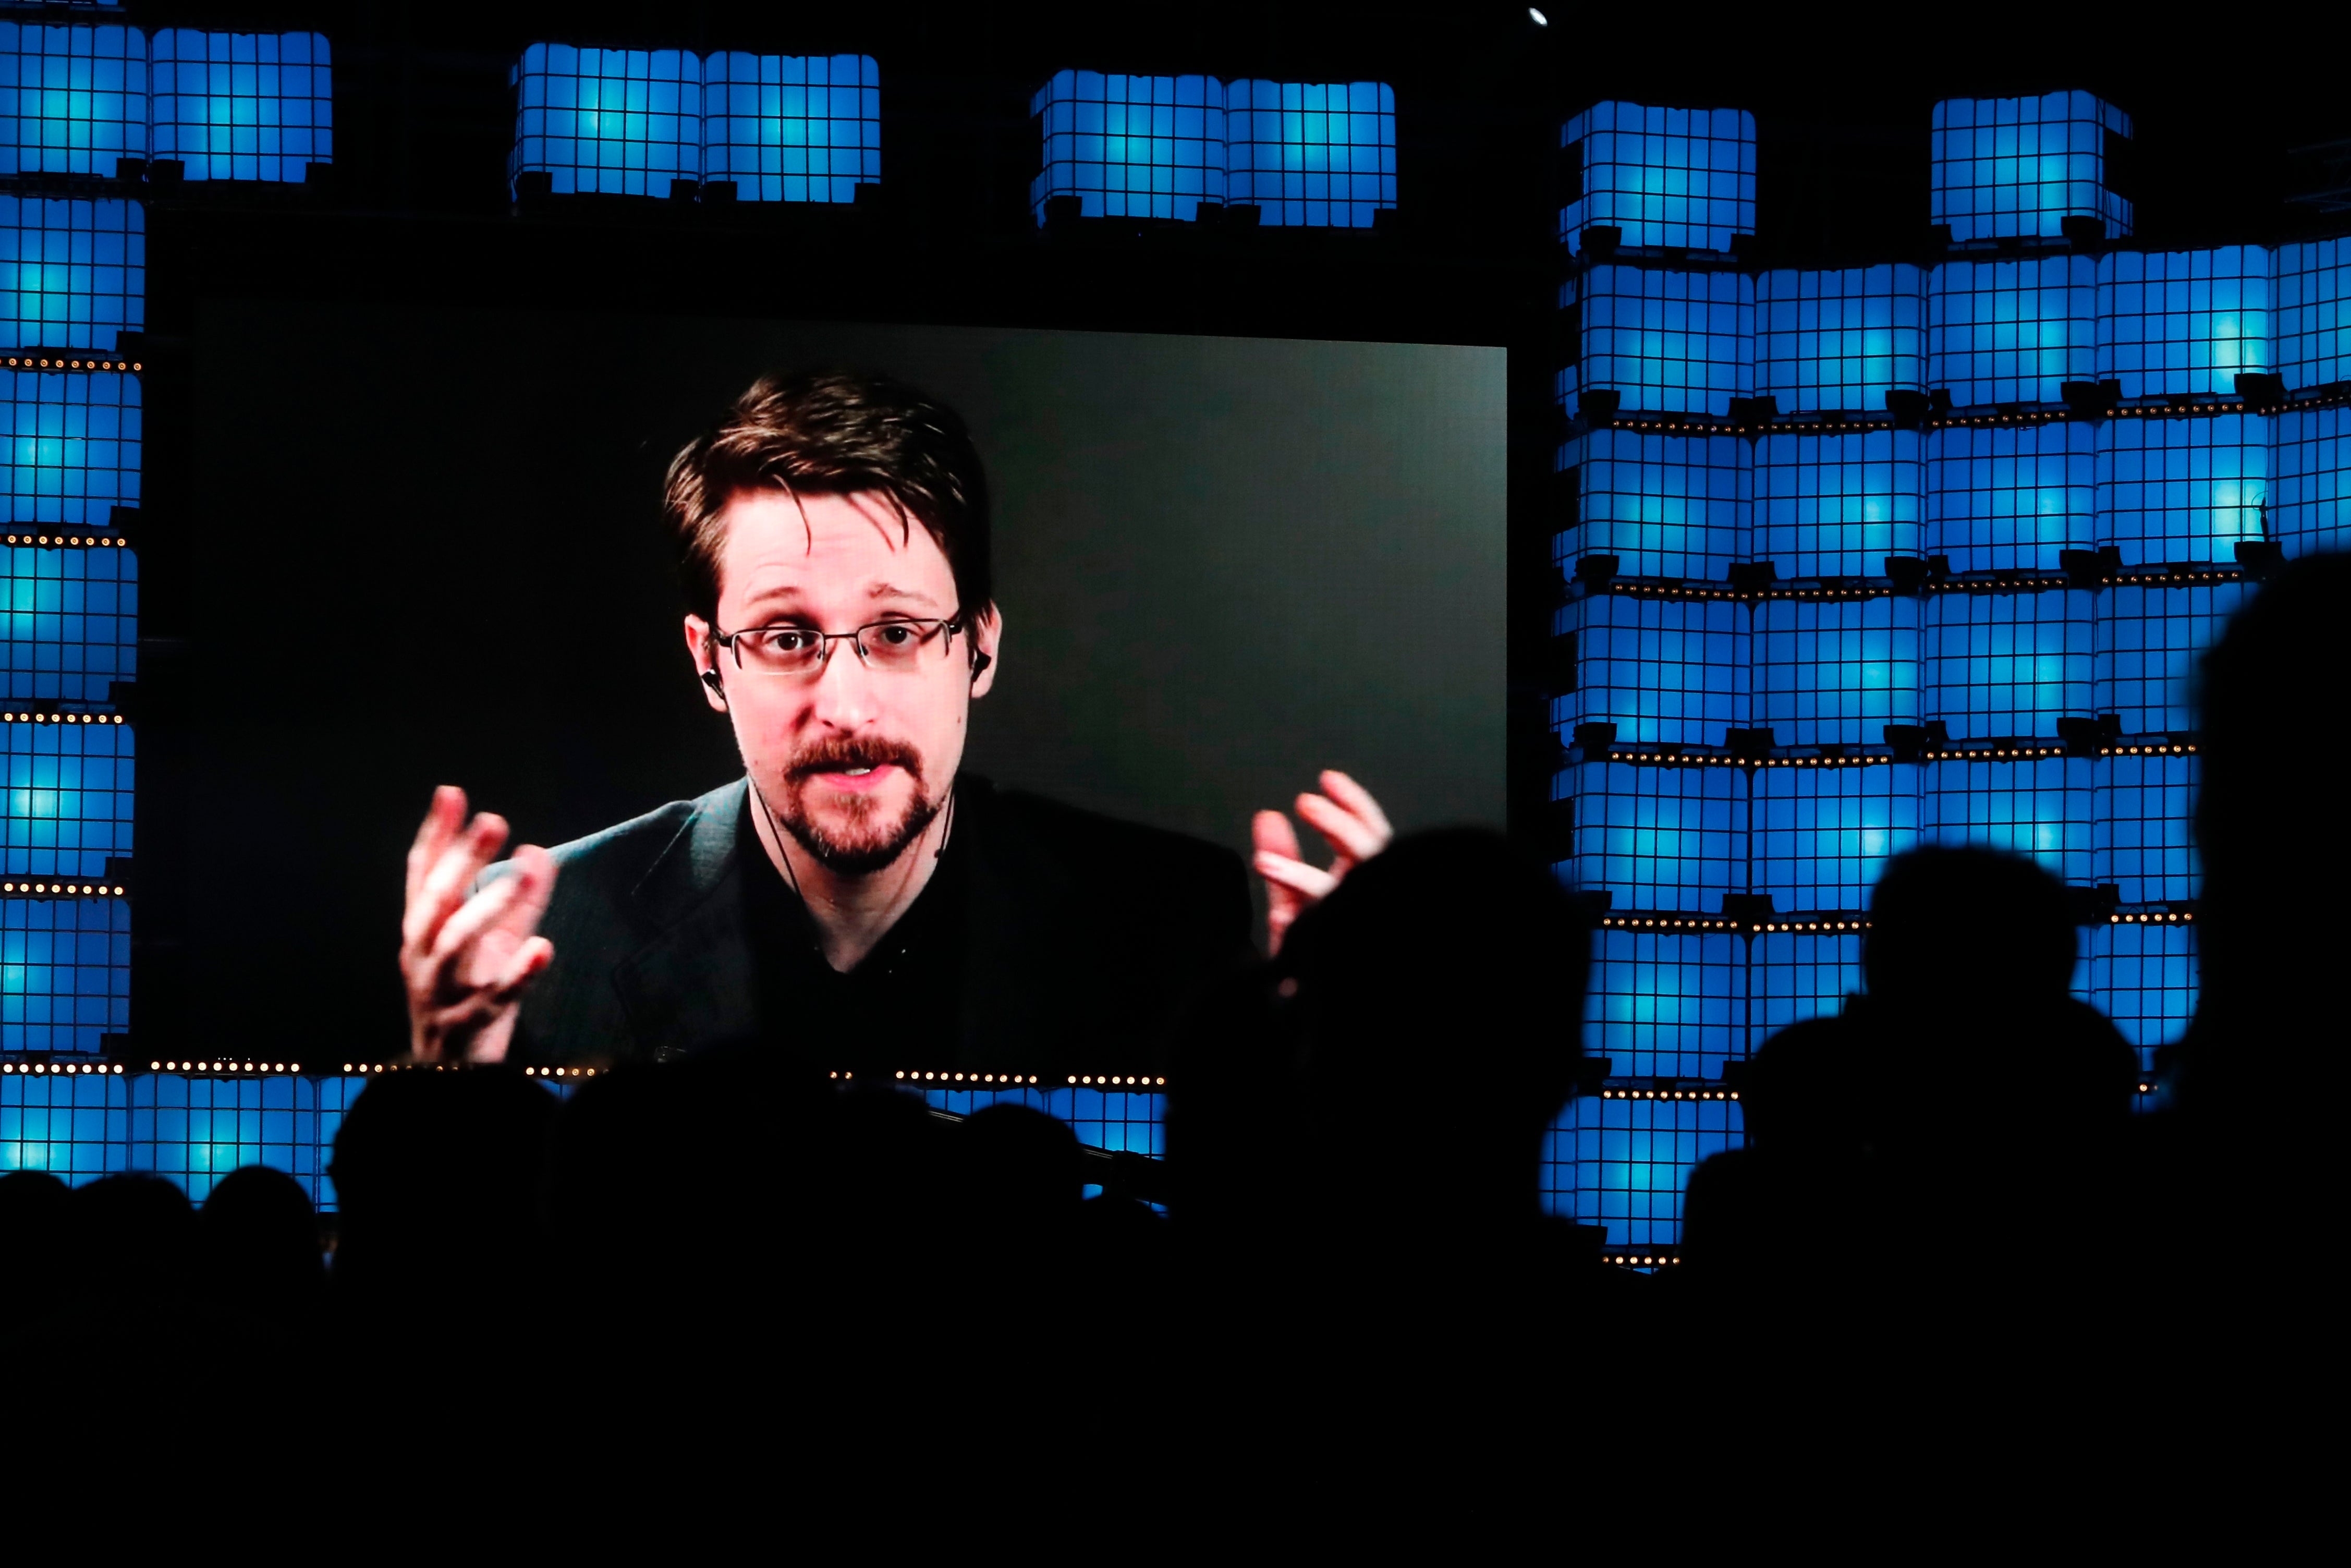 File. Former US National Security Agency contractor Edward Snowden addresses attendees through video link at the Web Summit technology conference in Lisbon on 4 November 2019